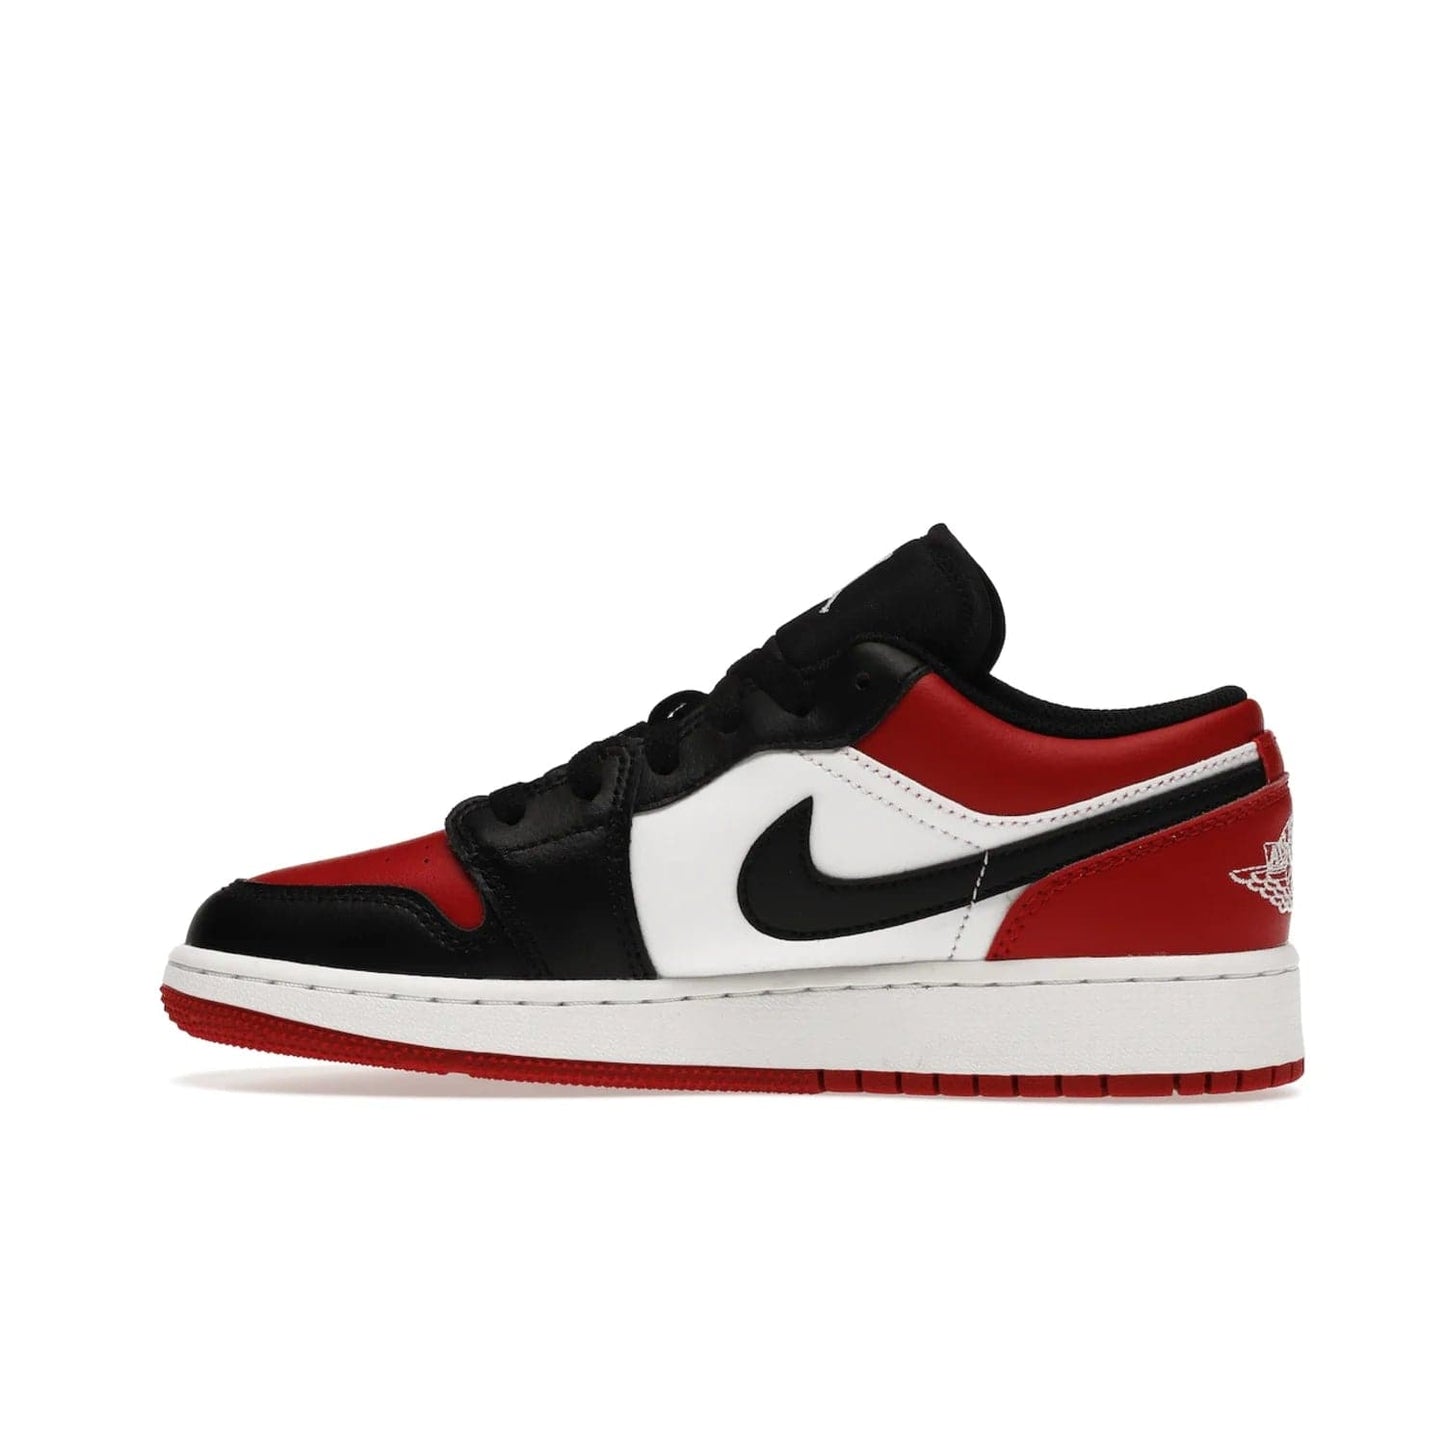 Jordan 1 Low Bred Toe (GS) - Image 20 - Only at www.BallersClubKickz.com - #
Iconic sneaker from Jordan brand with classic colorway, unique detailing & Air Jordan Wings logo. Step into the shoes of the greats with the Jordan 1 Low Bred Toe GS!